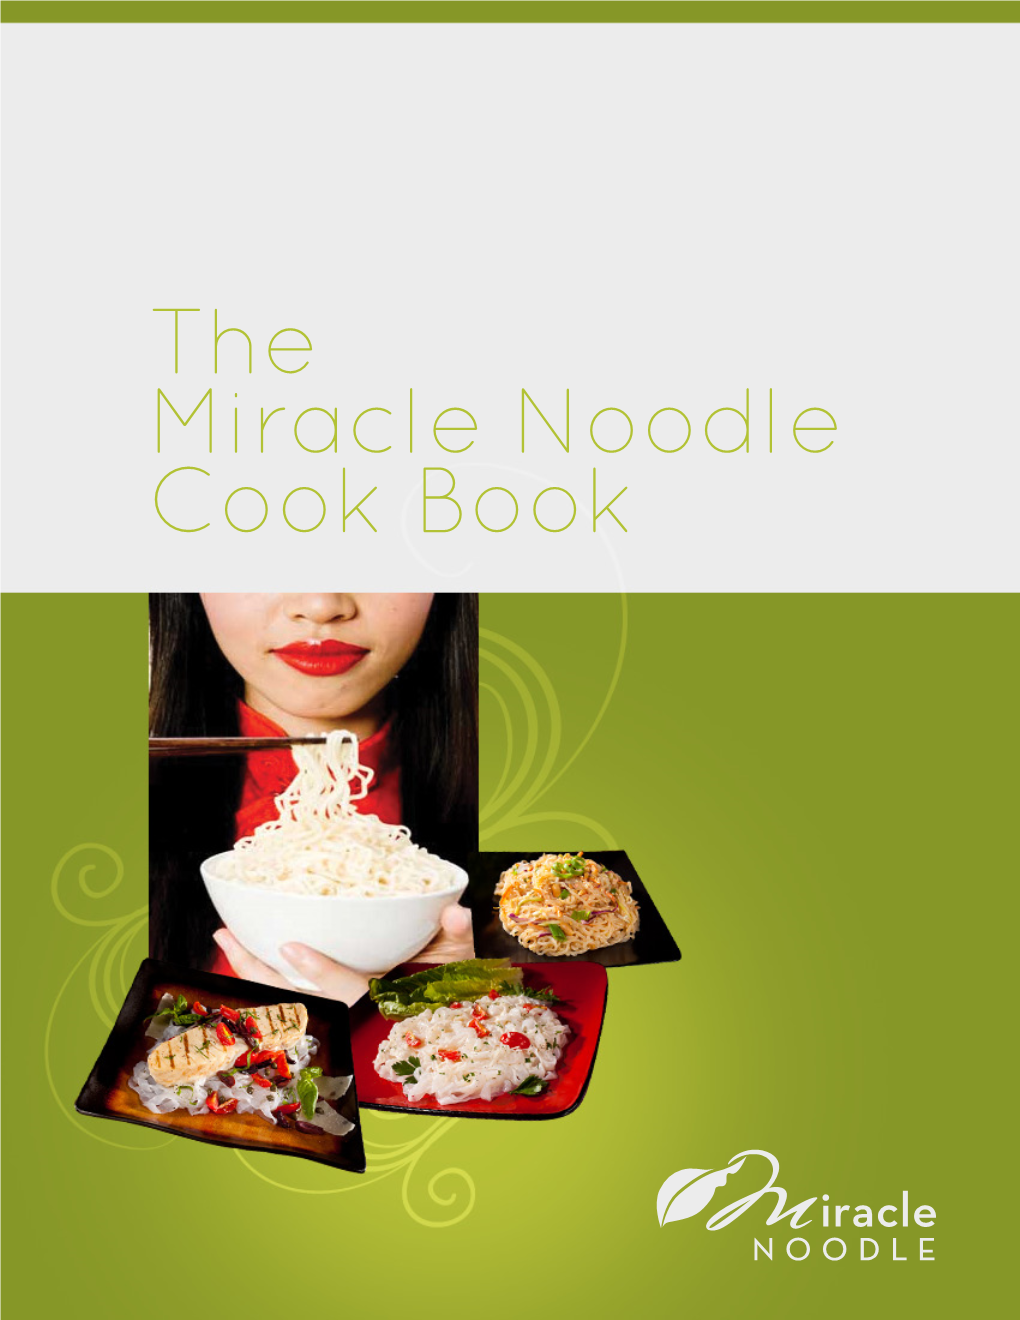 The Miracle Noodle Cook Book Contents